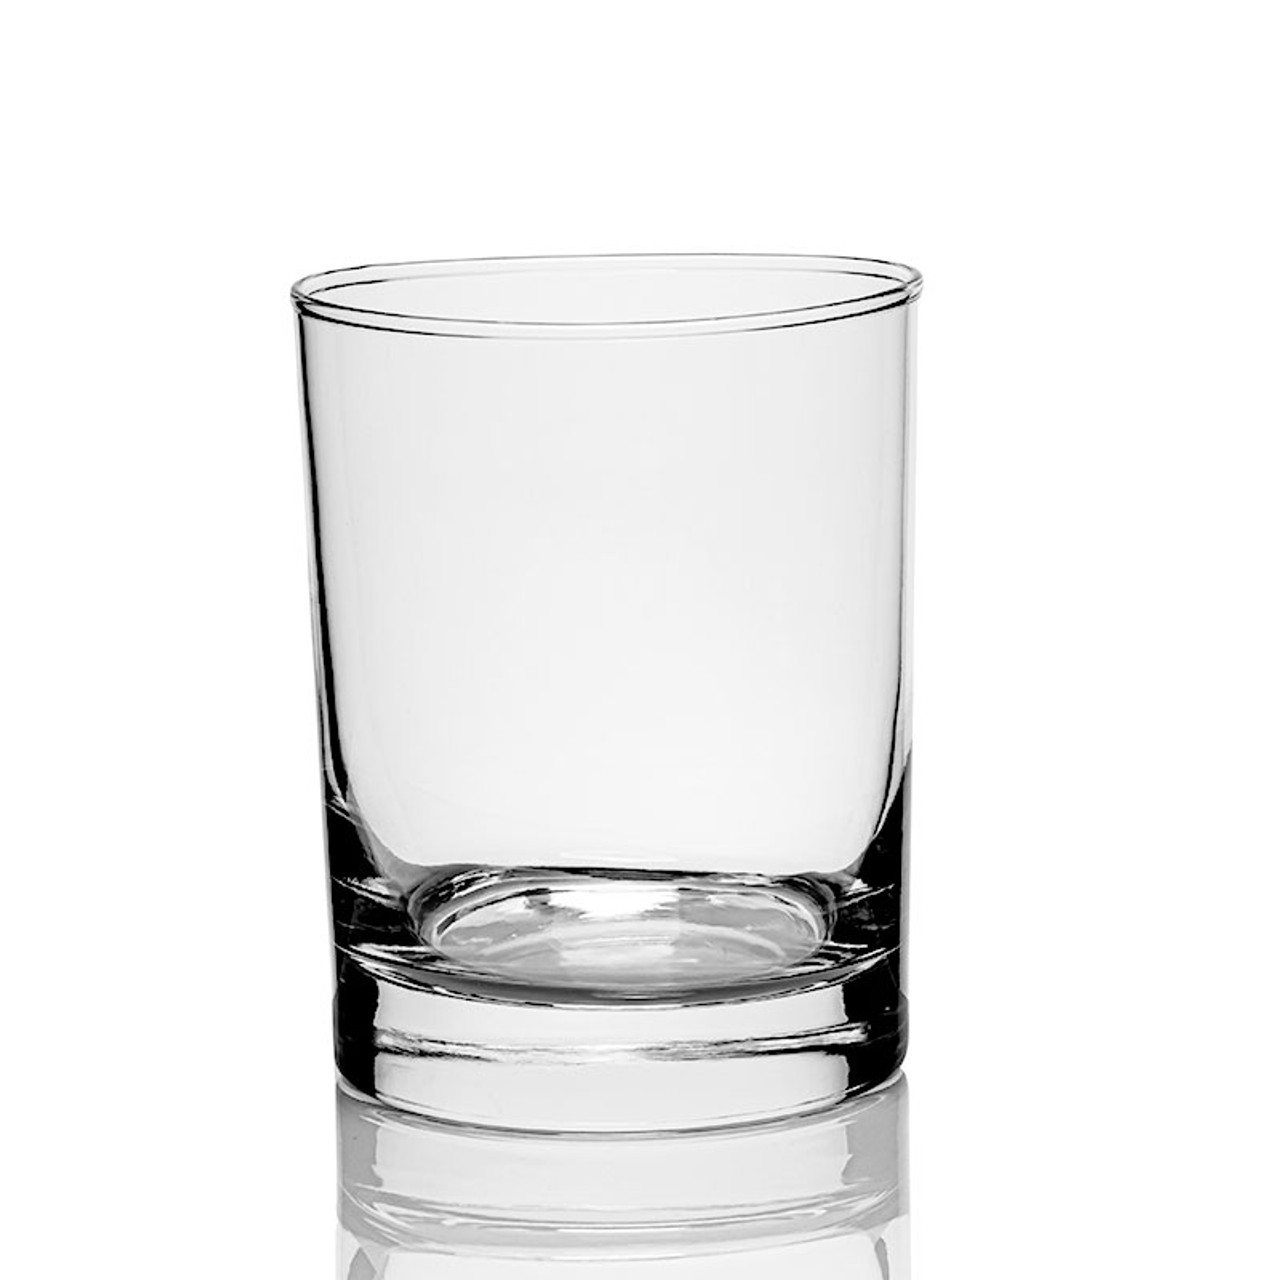 Spanish Beer Glass - Small - 13 oz - The Foundry Home Goods